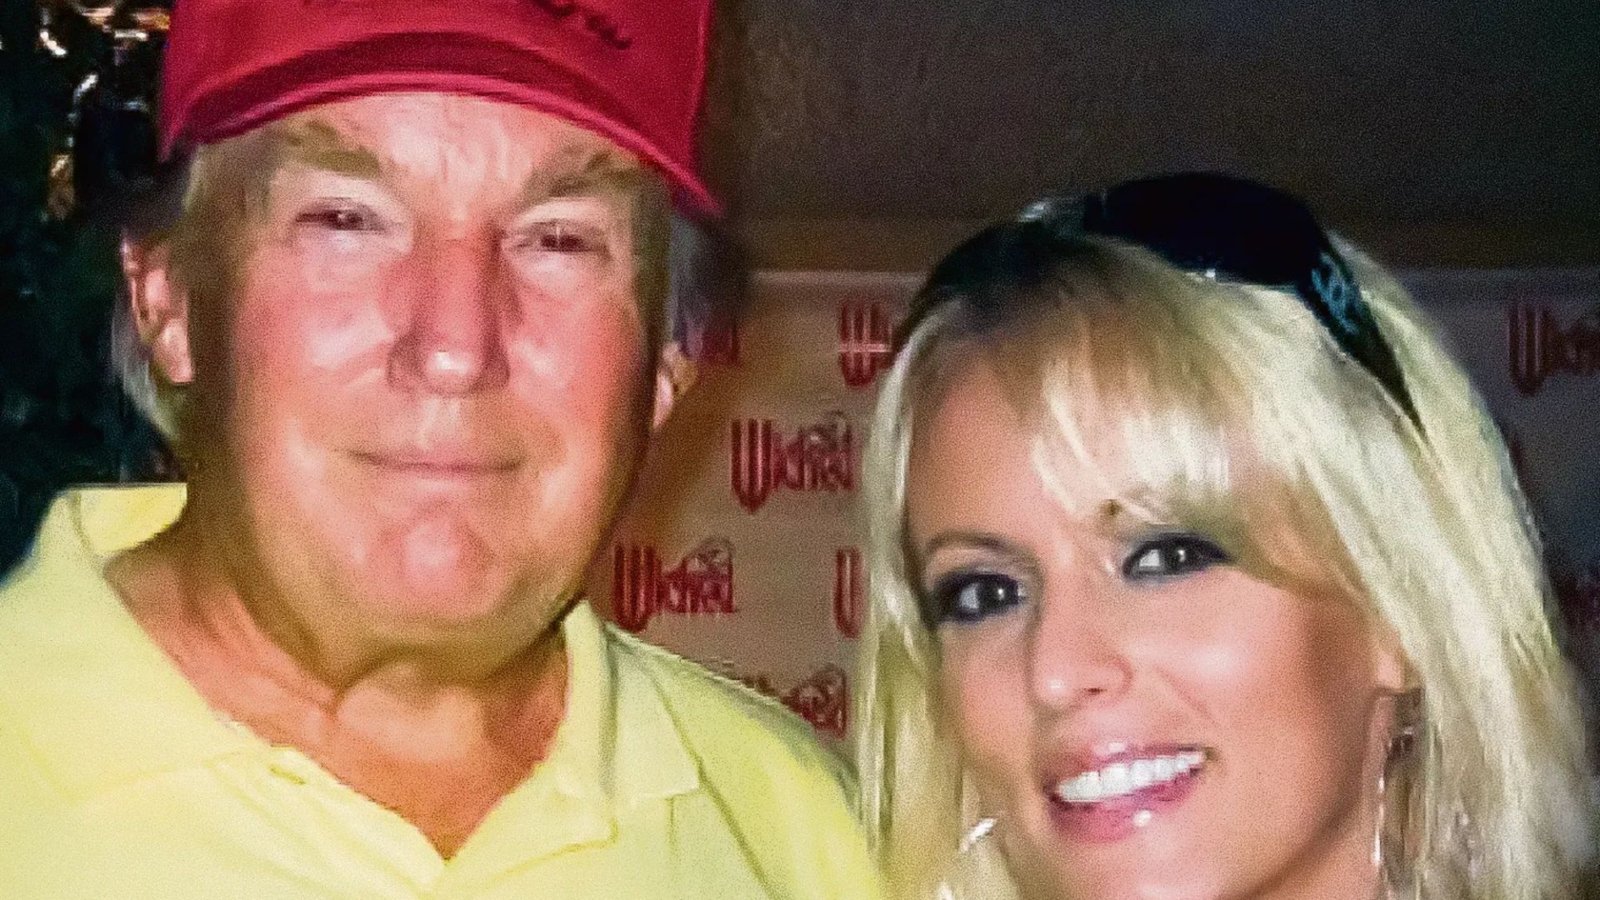 ‘Lock him up’ says Stormy Daniels as she breaks her silence after Donald Trump’s guilty hush-money verdict